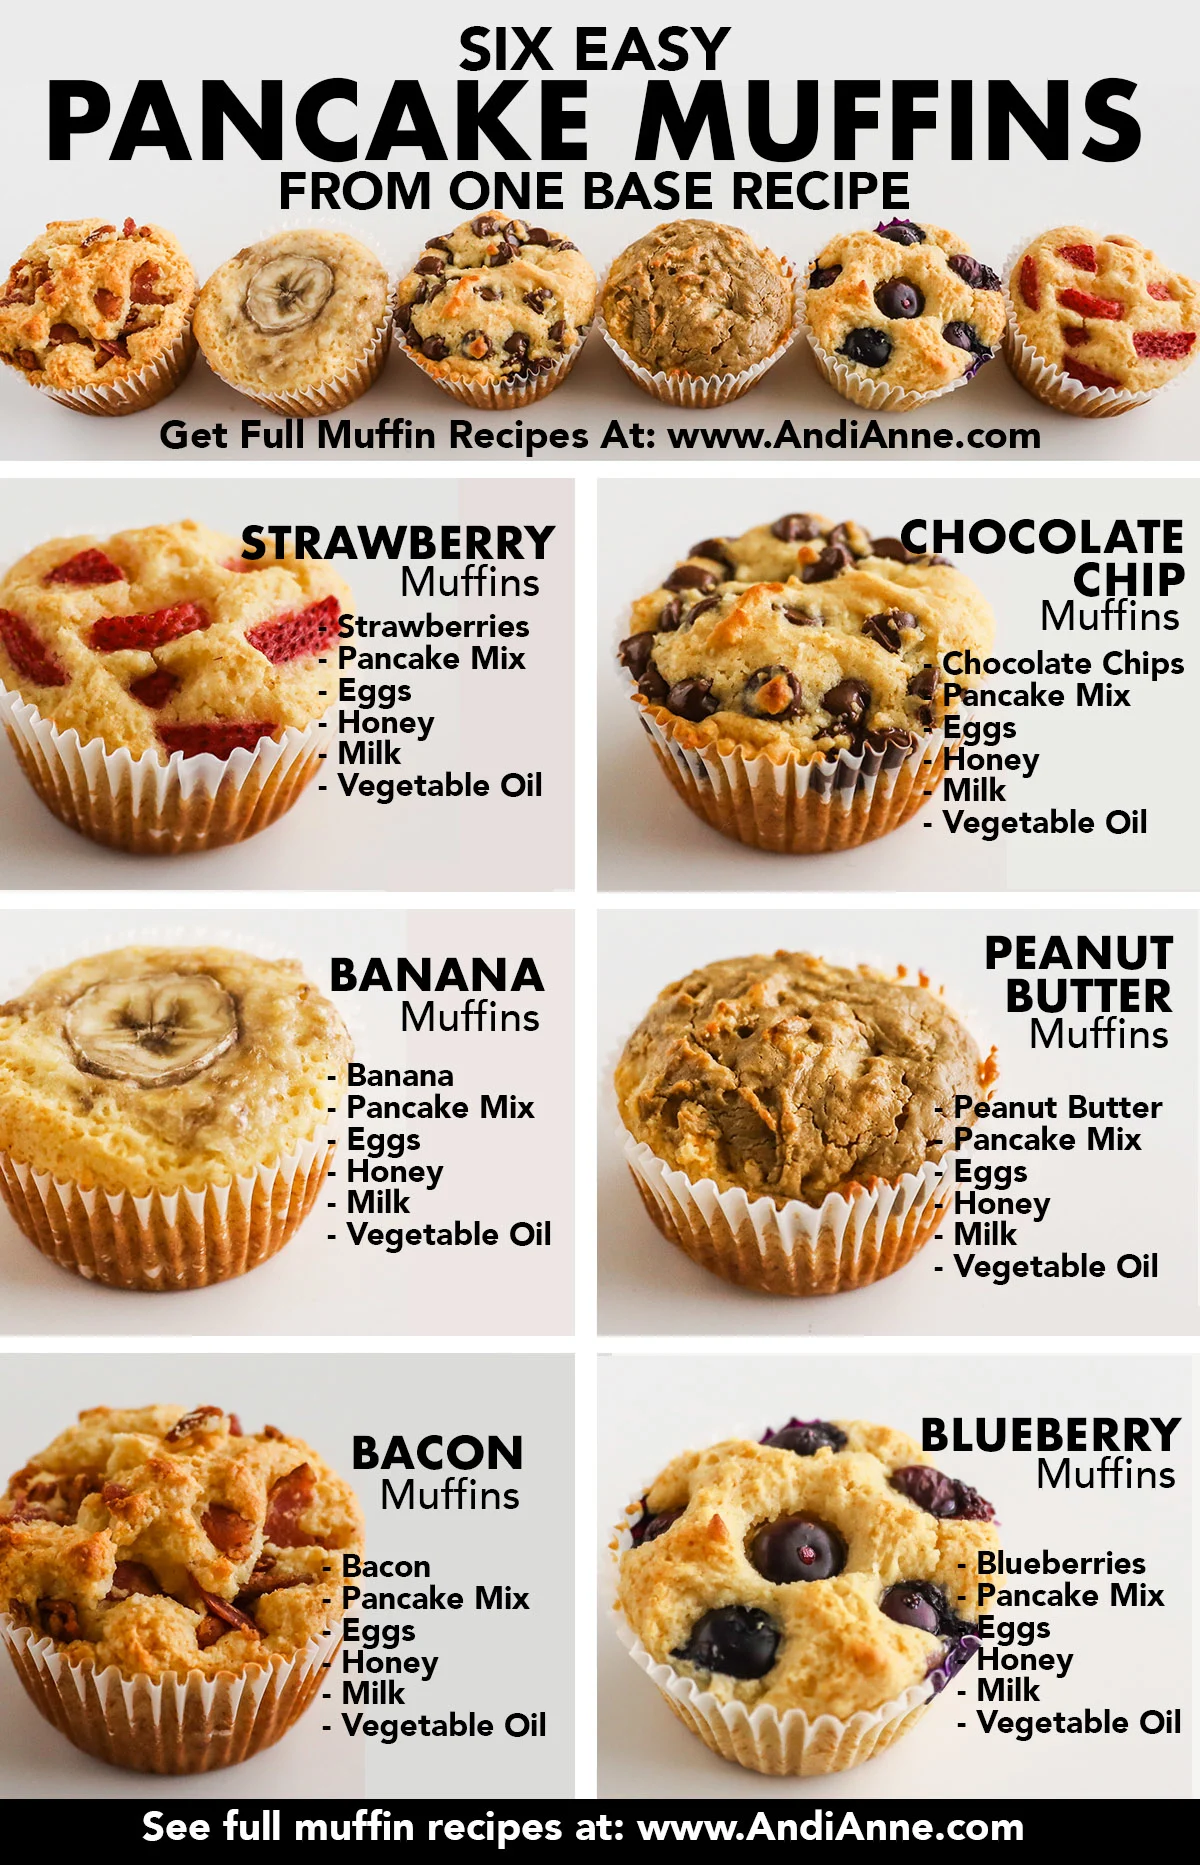 Six easy pancake muffins from one base recipe including strawberry, chocolate chip, banana, peanut butter, bacon and blueberry with a list of ingredients written out for each one.